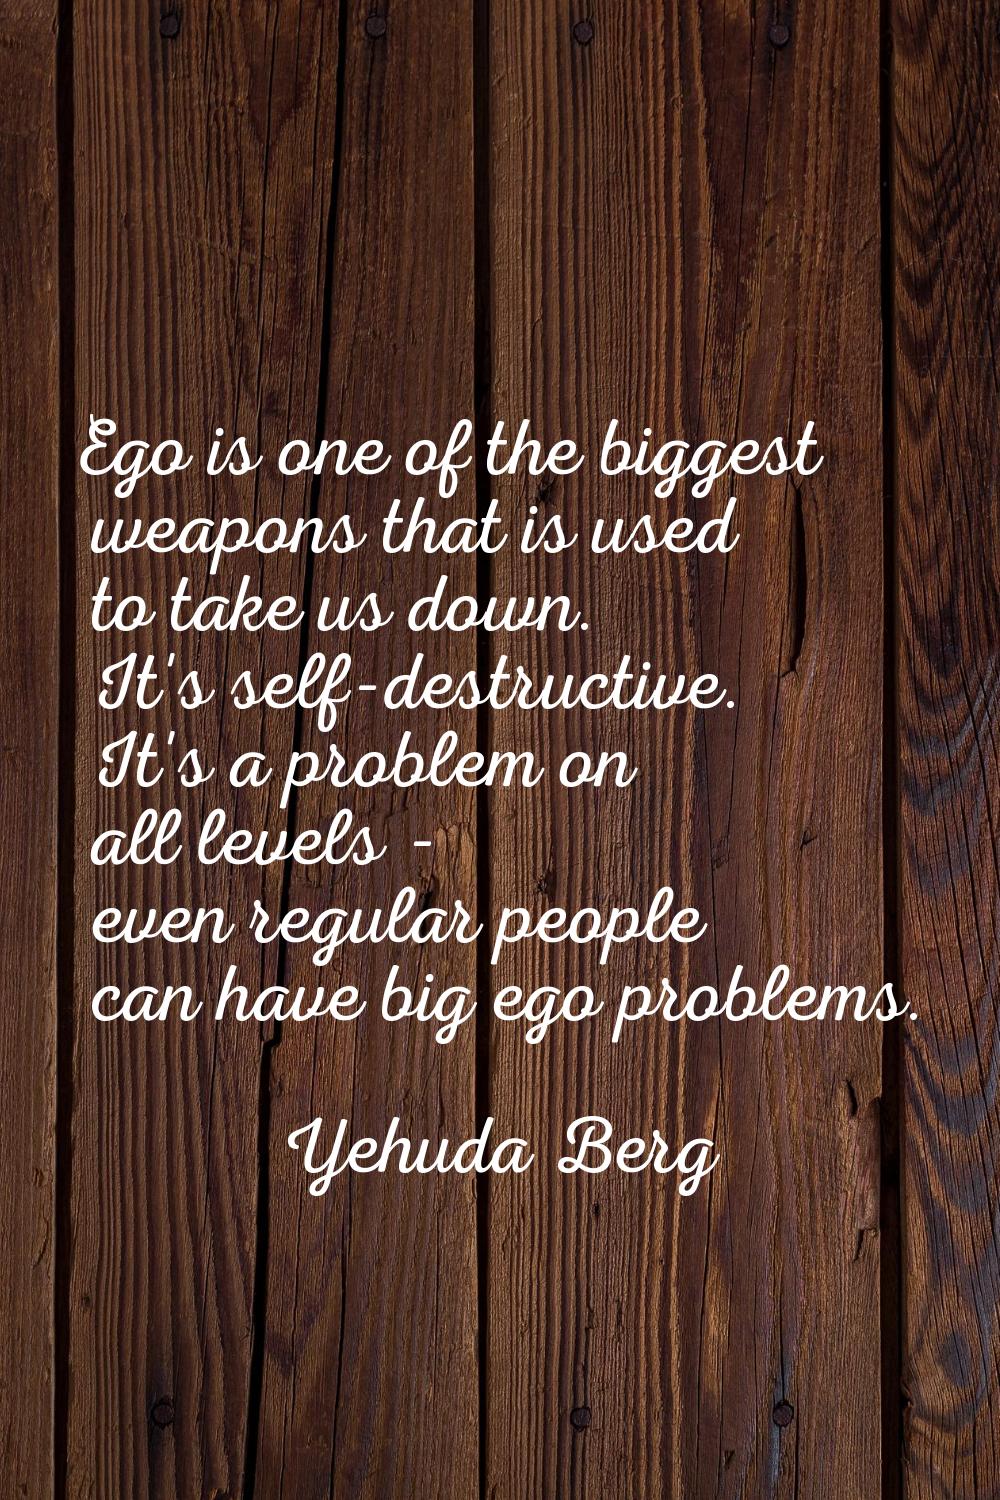 Ego is one of the biggest weapons that is used to take us down. It's self-destructive. It's a probl